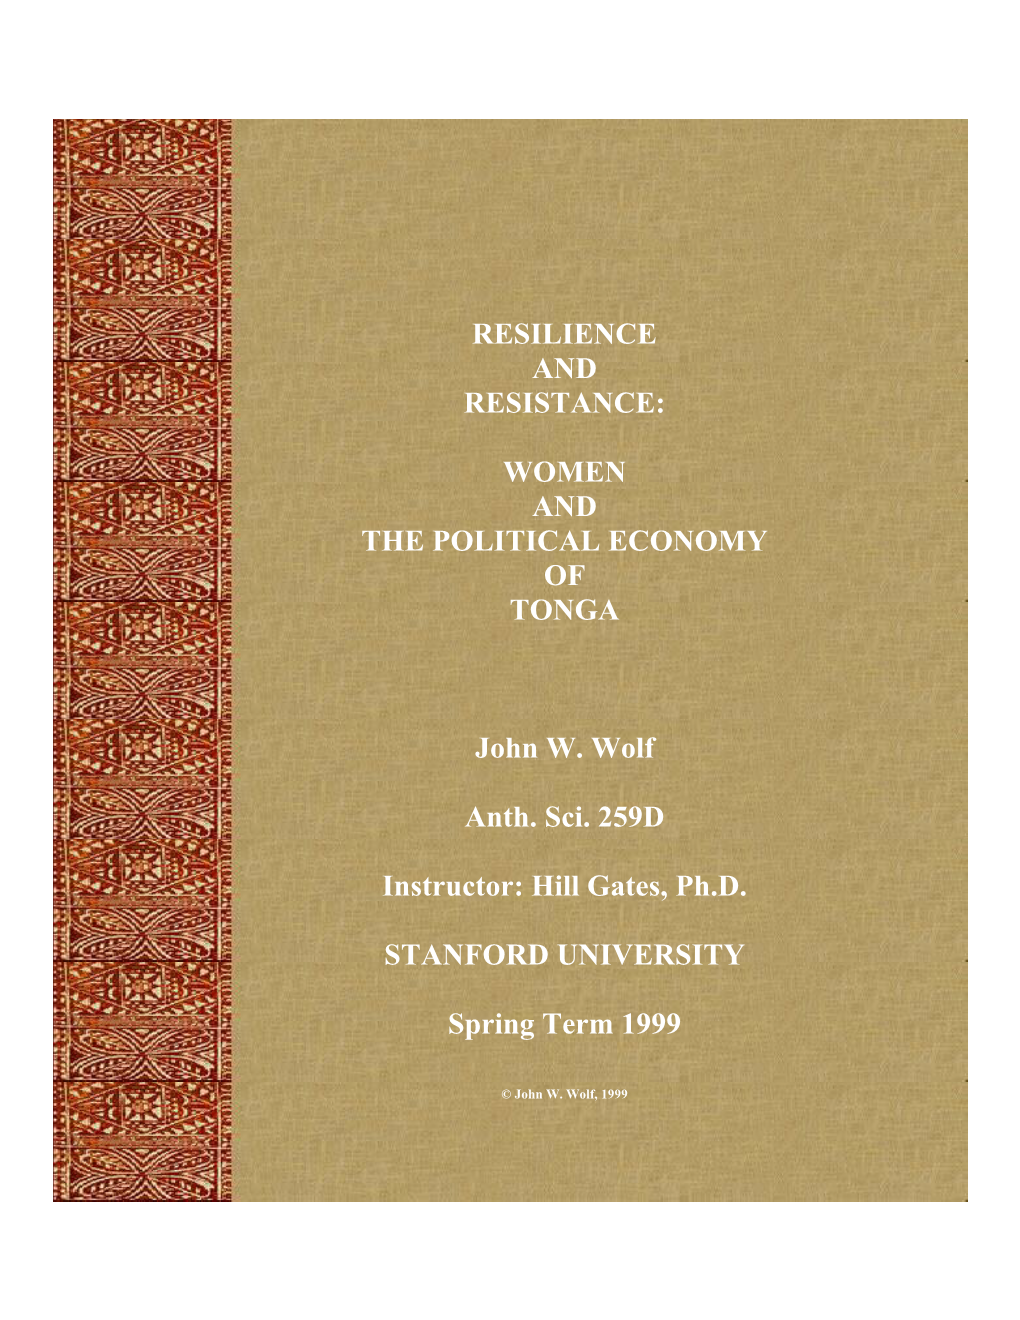 Resilience and Resistance: Women and the Political Economy of Tonga